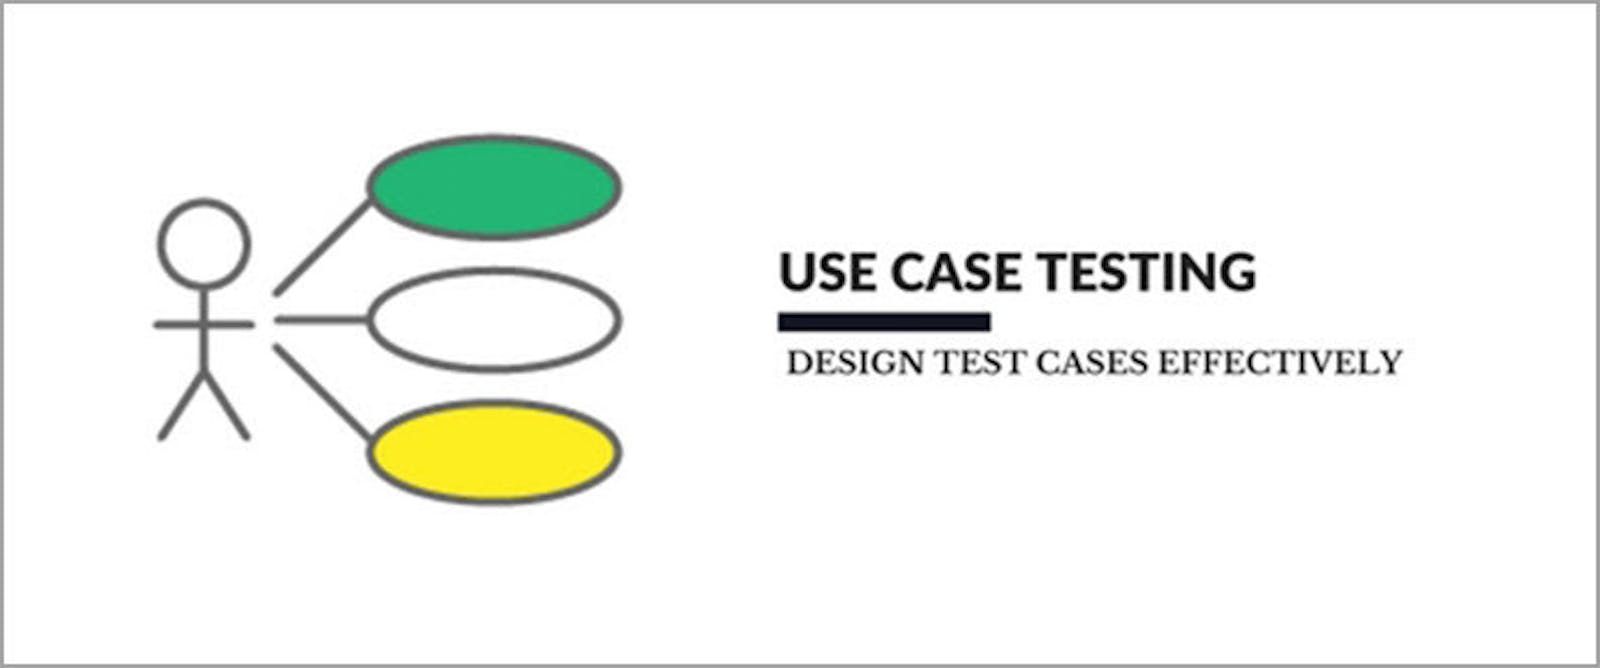 Use Case Testing doubles the power of Software Testing!!